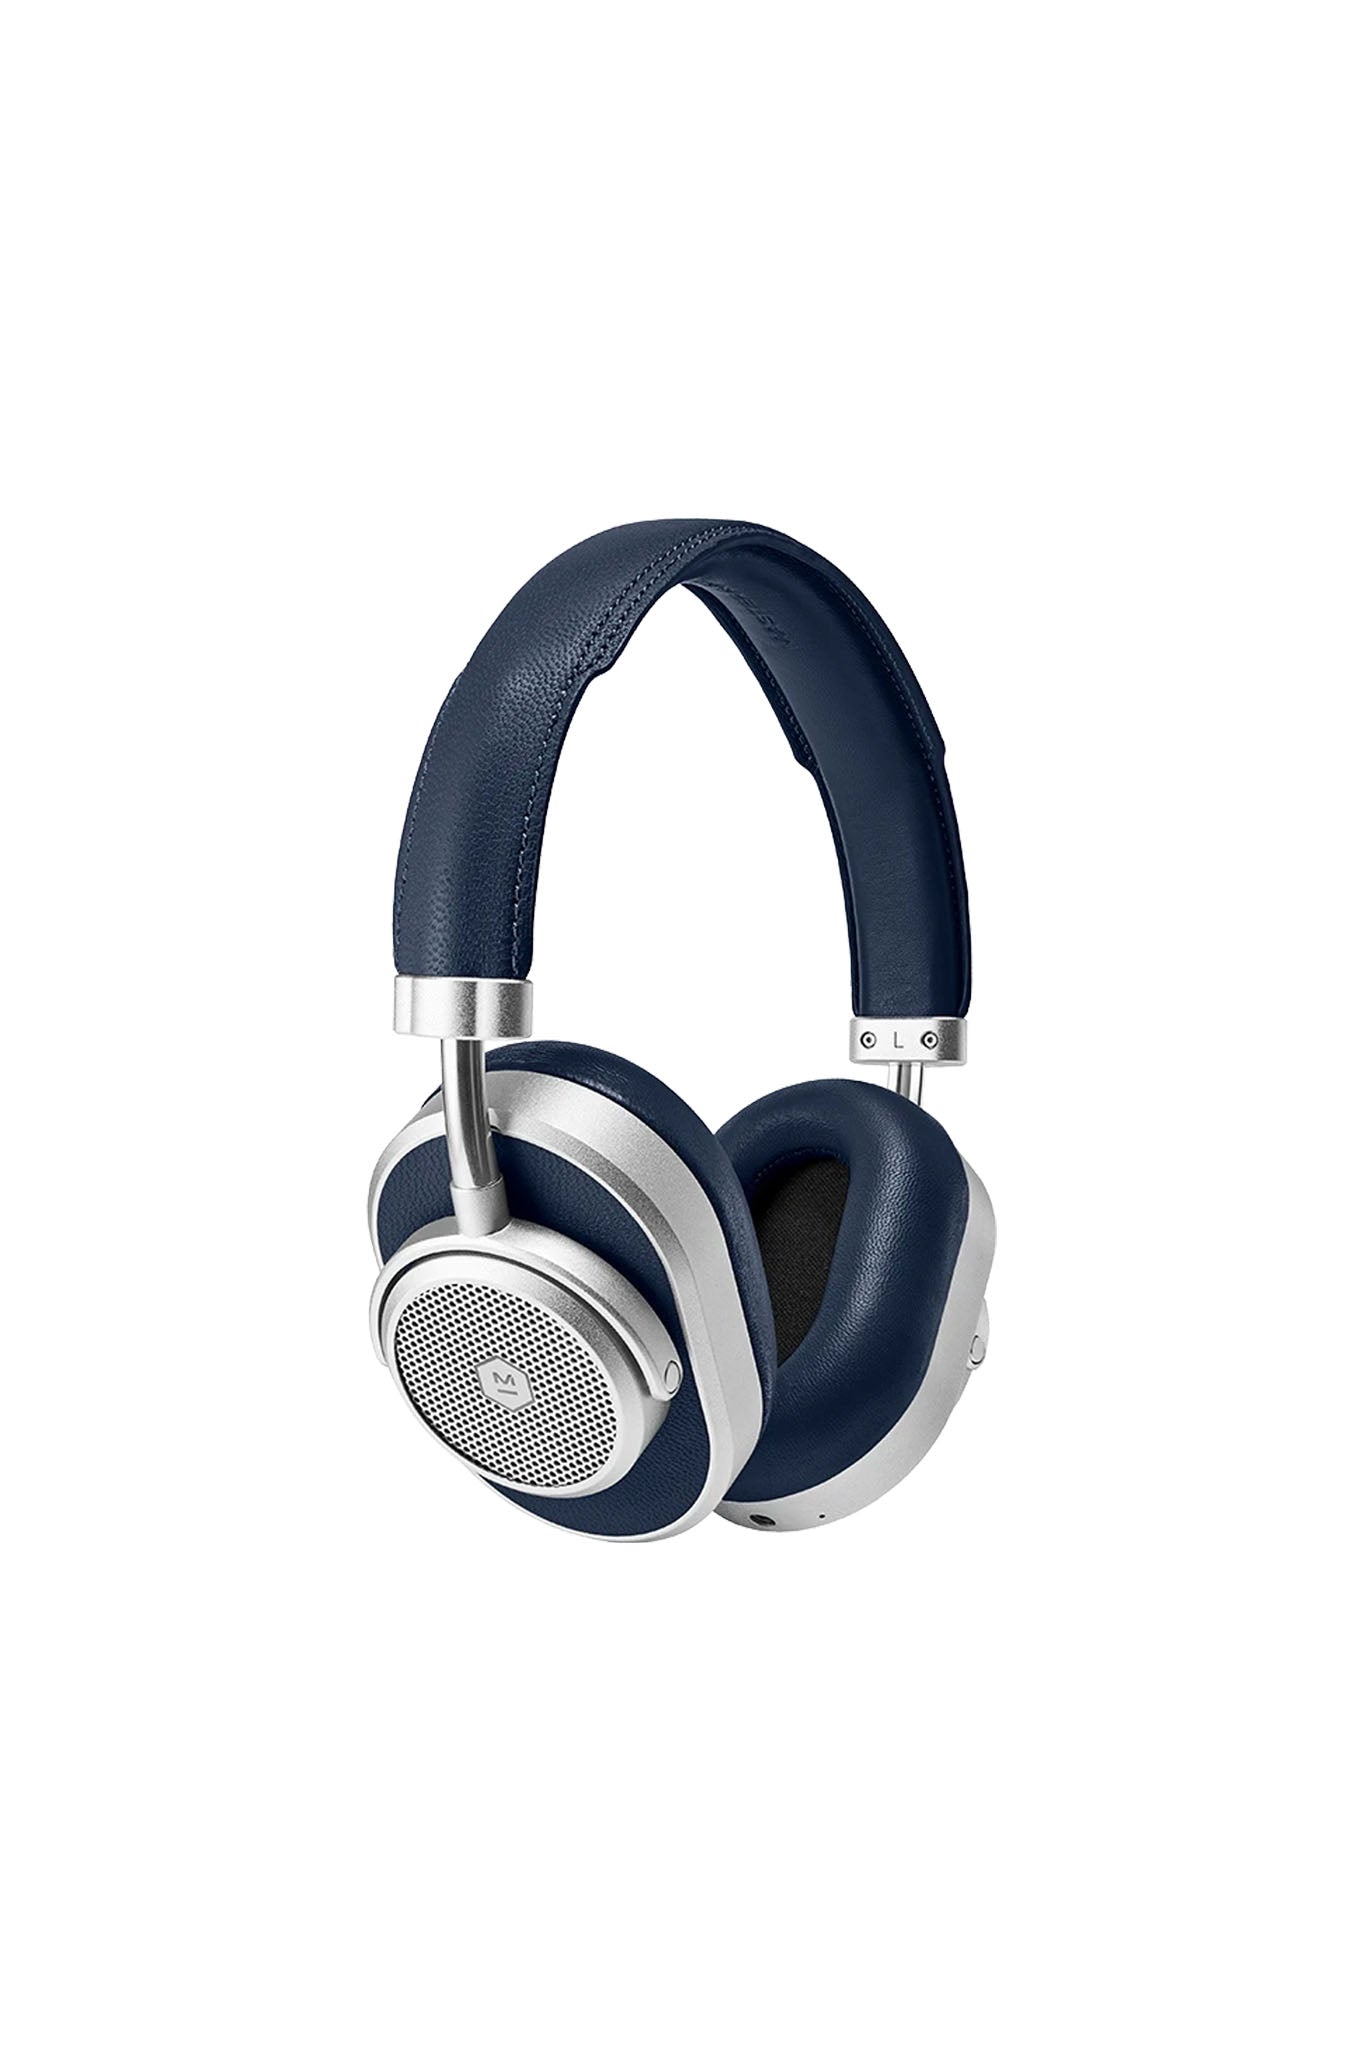 Silver & Navy Noise Cancelling Wireless Headphones